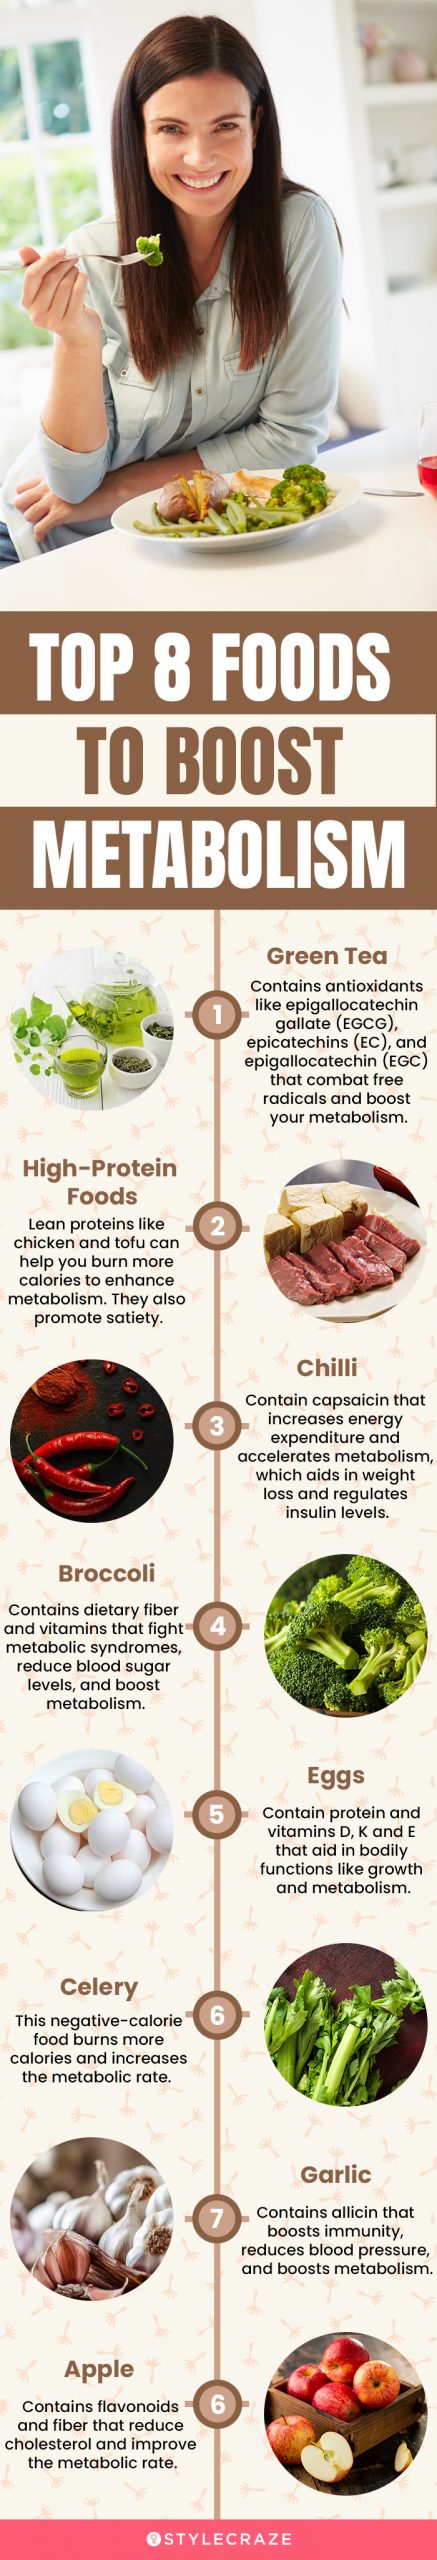 top 8 foods to boost metabolism (infographic)